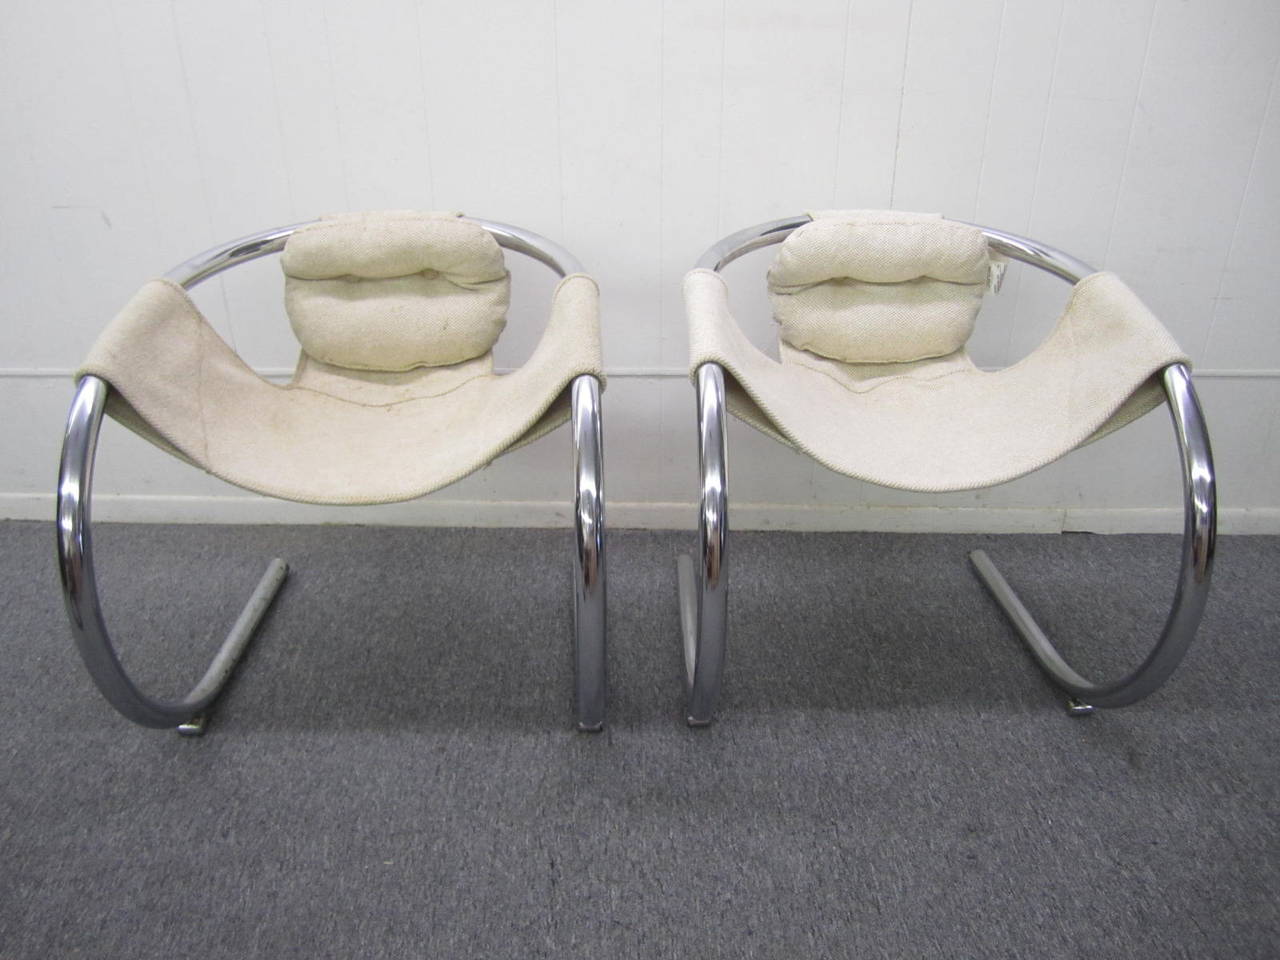 Vintage pair of California Modern chrome and fabric chairs by Bryon Botker for Landes Manufacturer. Good condition with age appropriate wear.